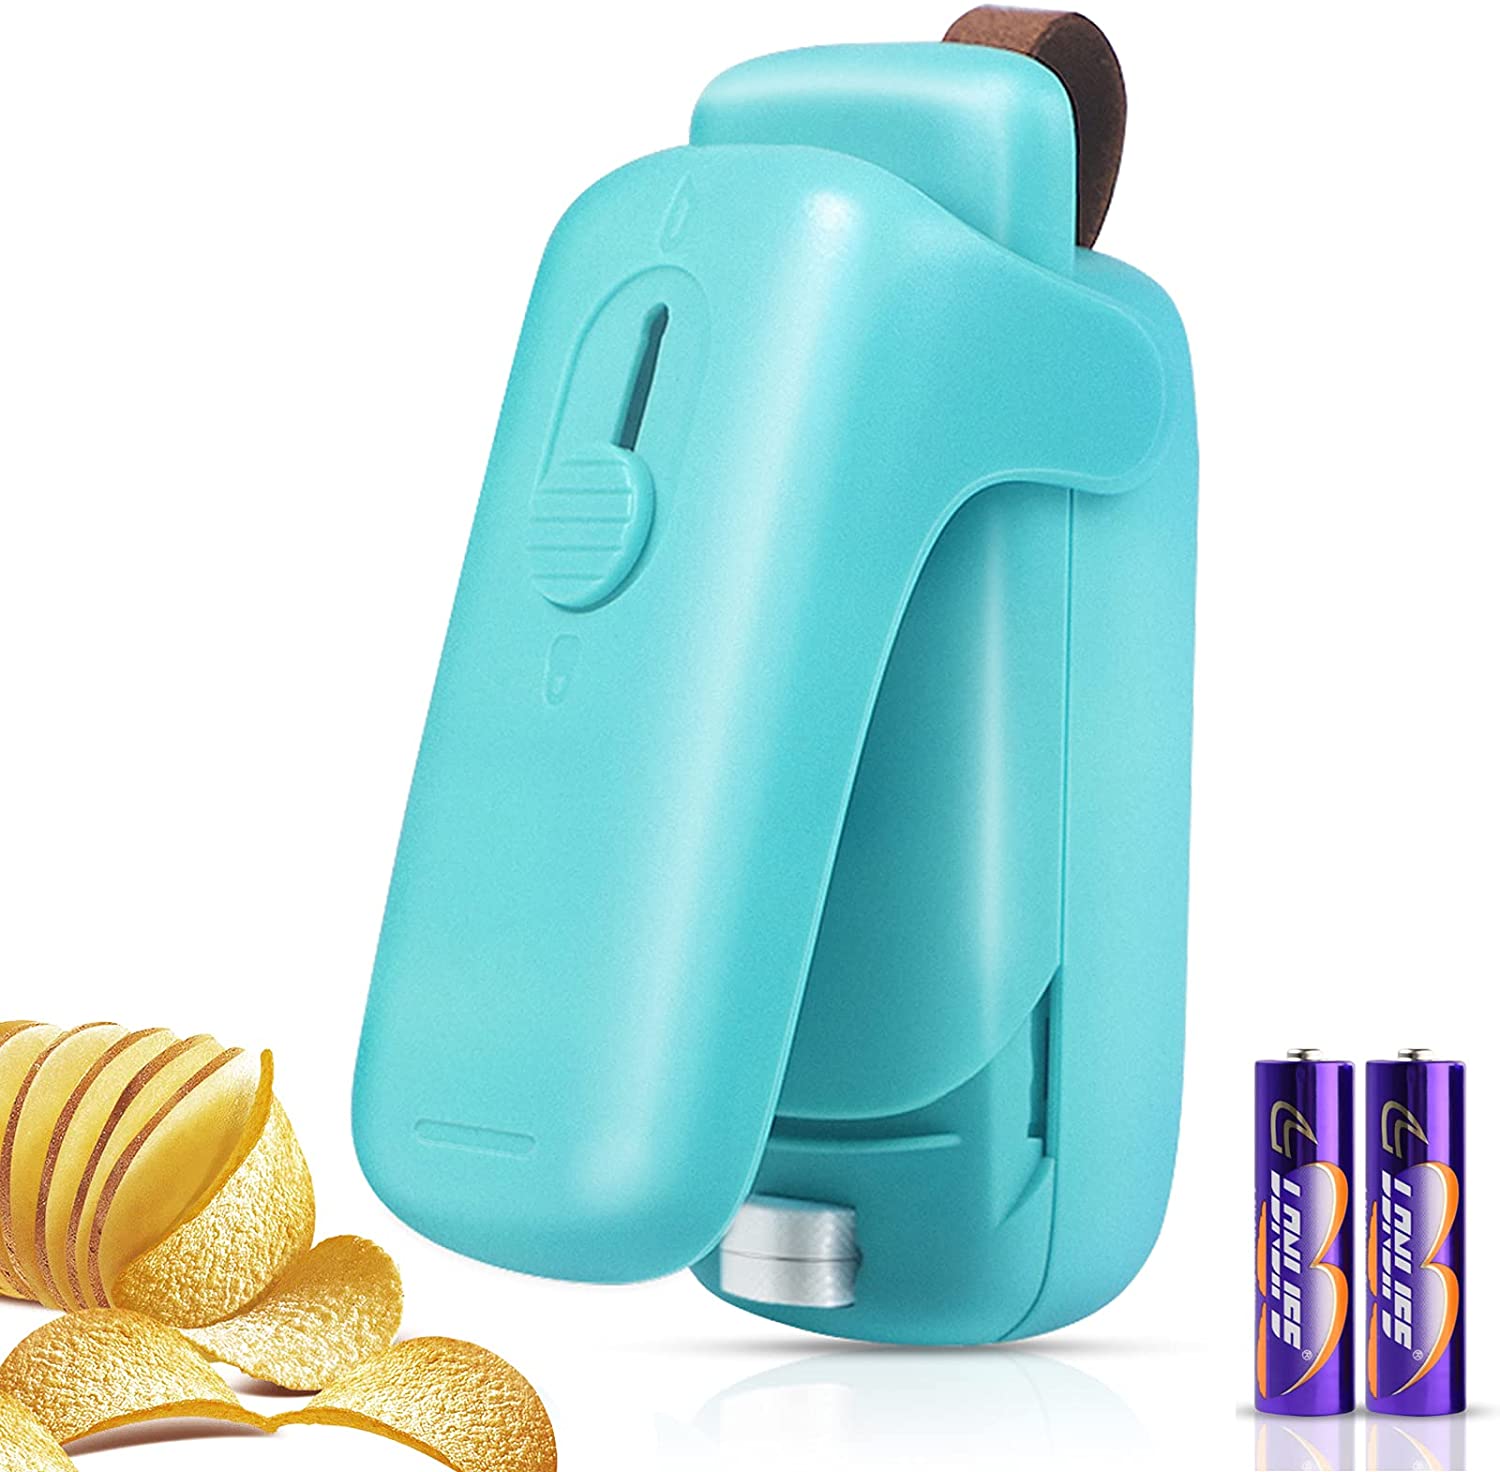 LORDSON Mini Bag Sealer, Handheld Portable Bag Heat Vacuum Resealer, 2 in 1 Heat Sealer & Cutter Food Saver Machine for Plastic Bags Snack Cookie Candy Chip Bags (Battery Included)